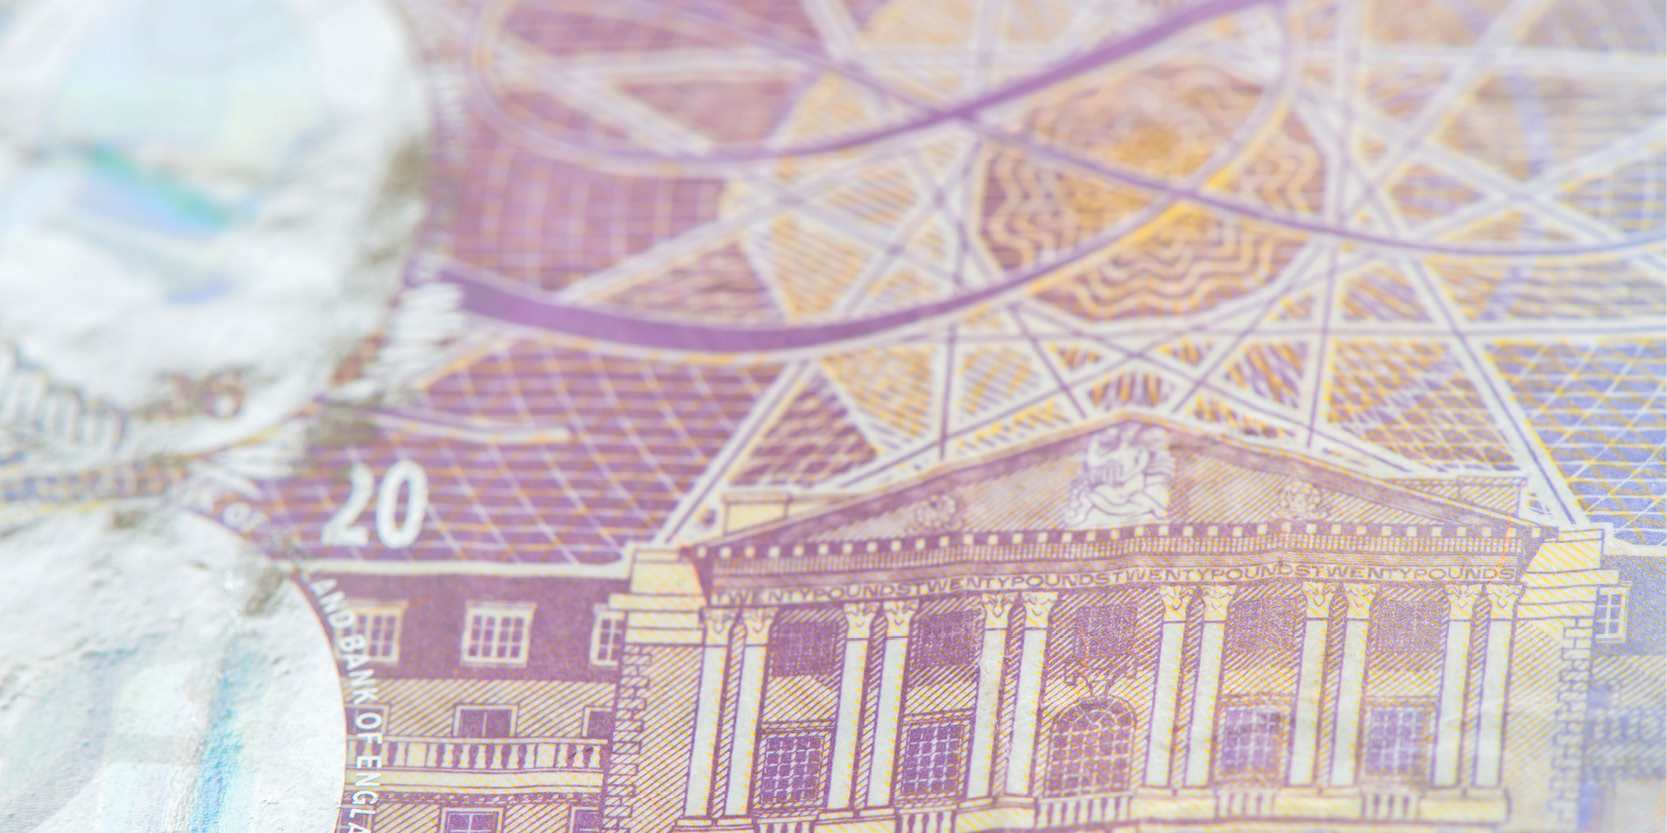 Zoomed in image of a £20 note